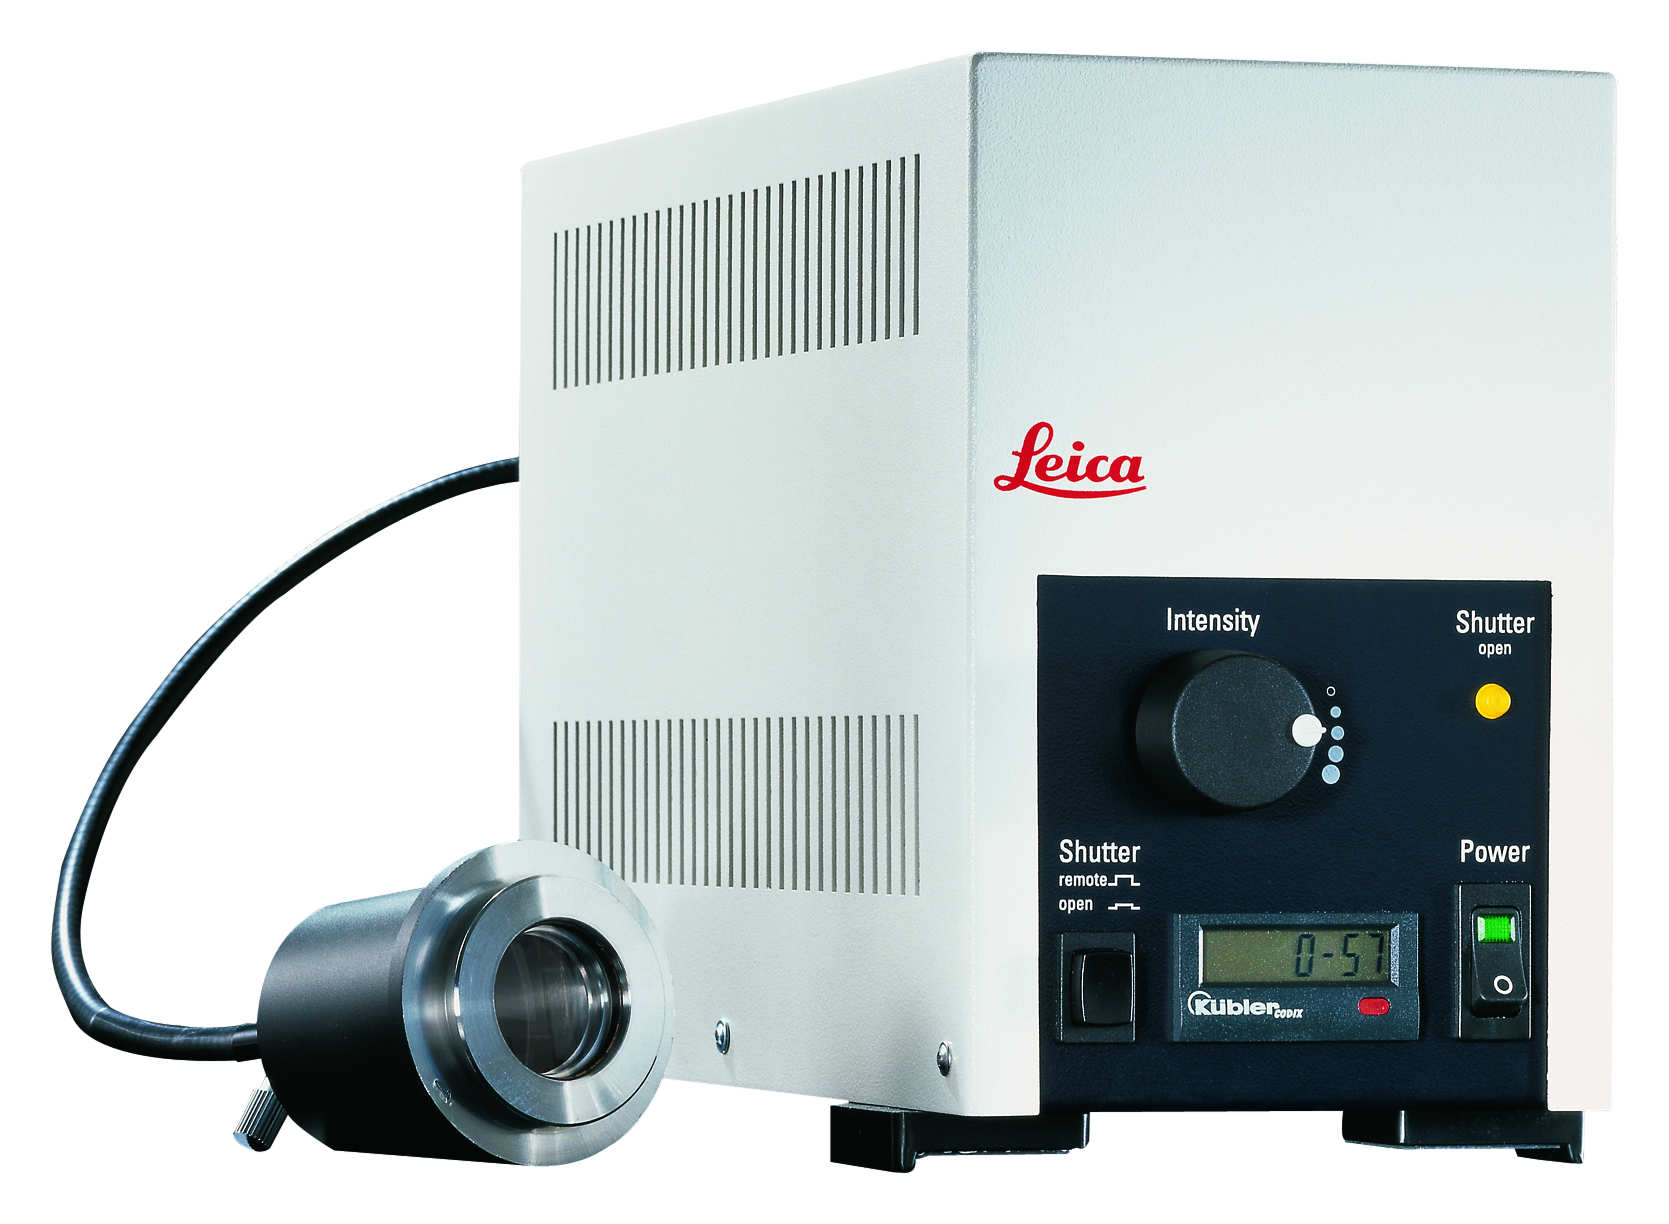 The Leica EL6000 is an ideal, affordable enhancement for fluorescence imaging.